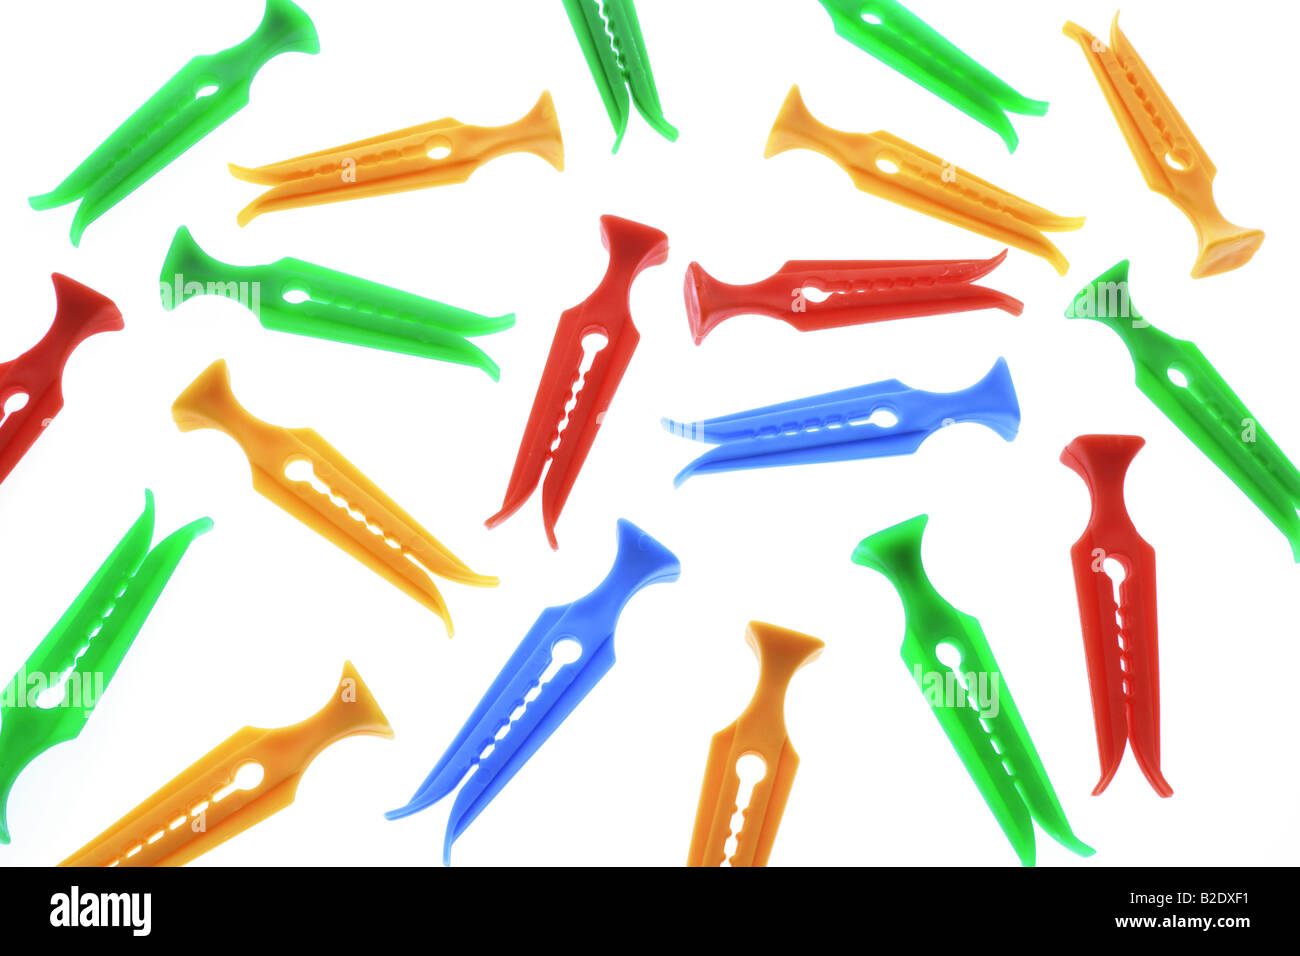 Plastic Clothes Pegs Stock Photo